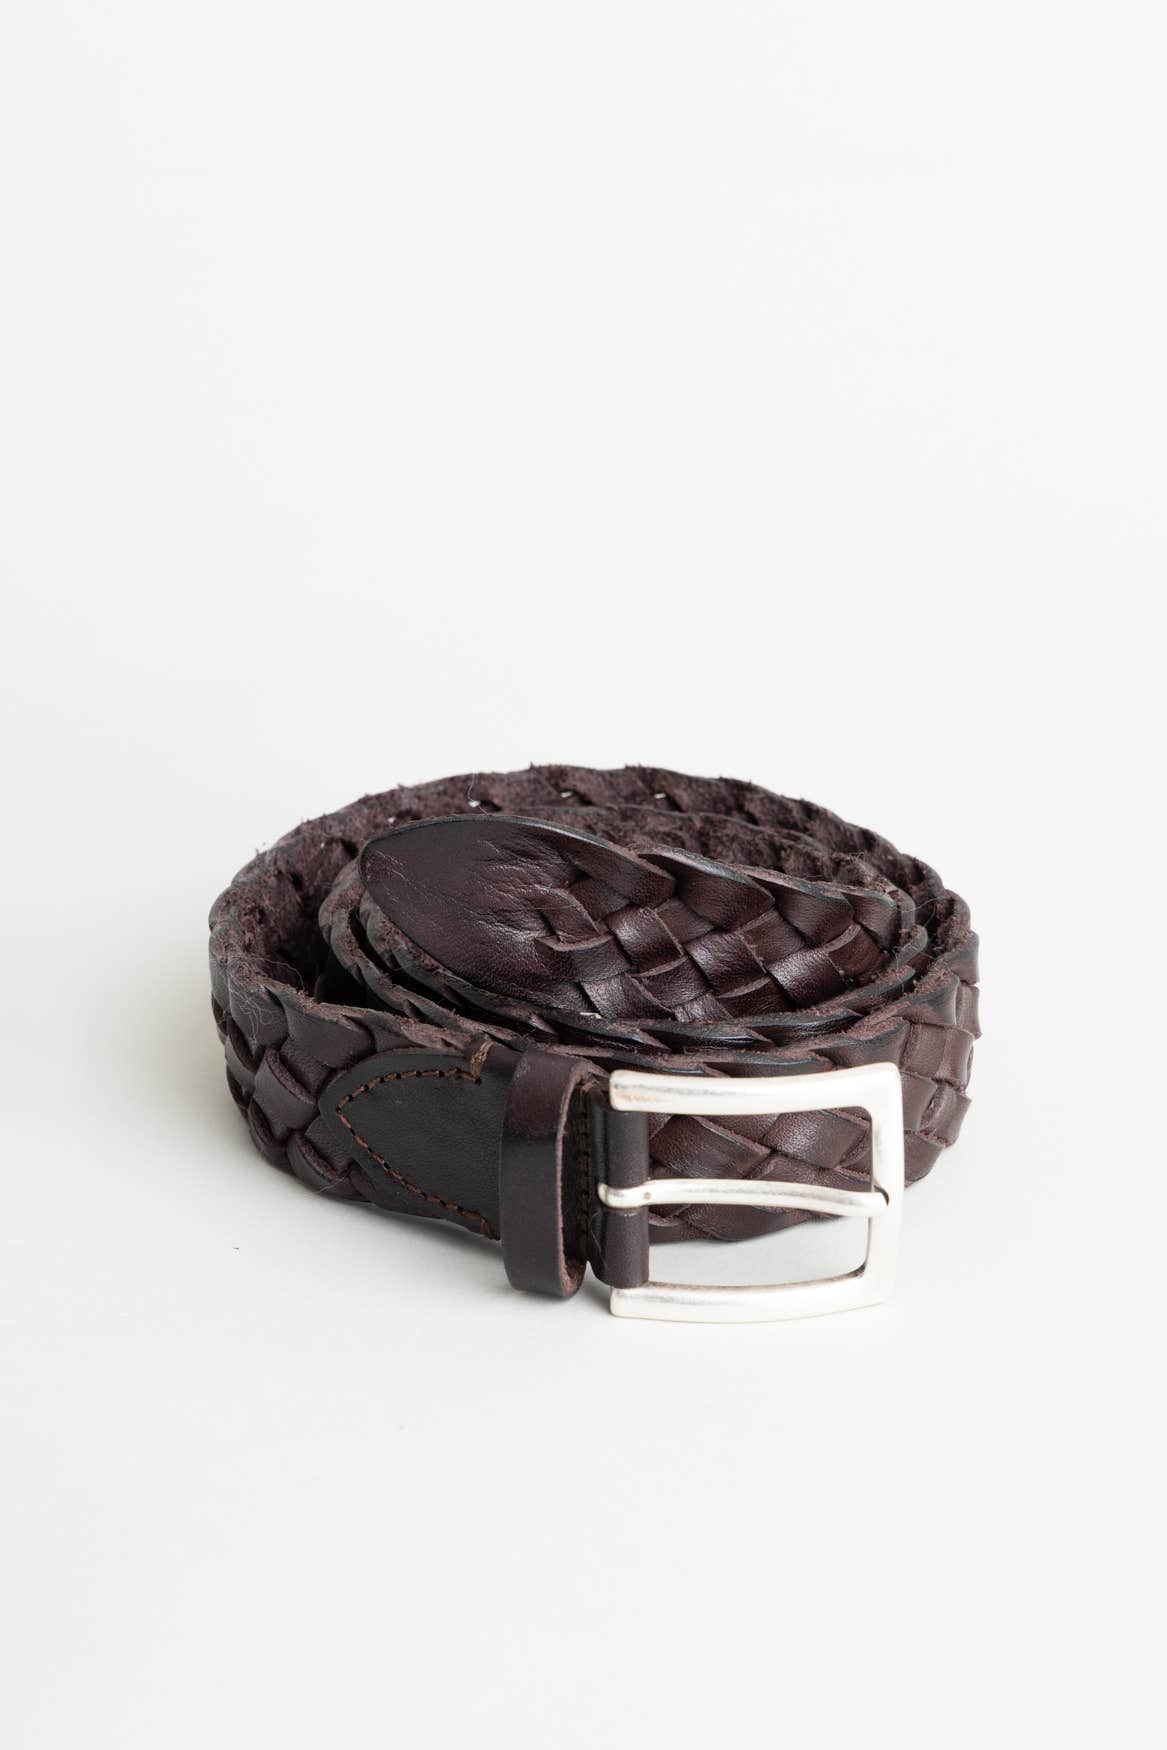 Male Leather Braided belt Free size Dual colour Black-Brown for